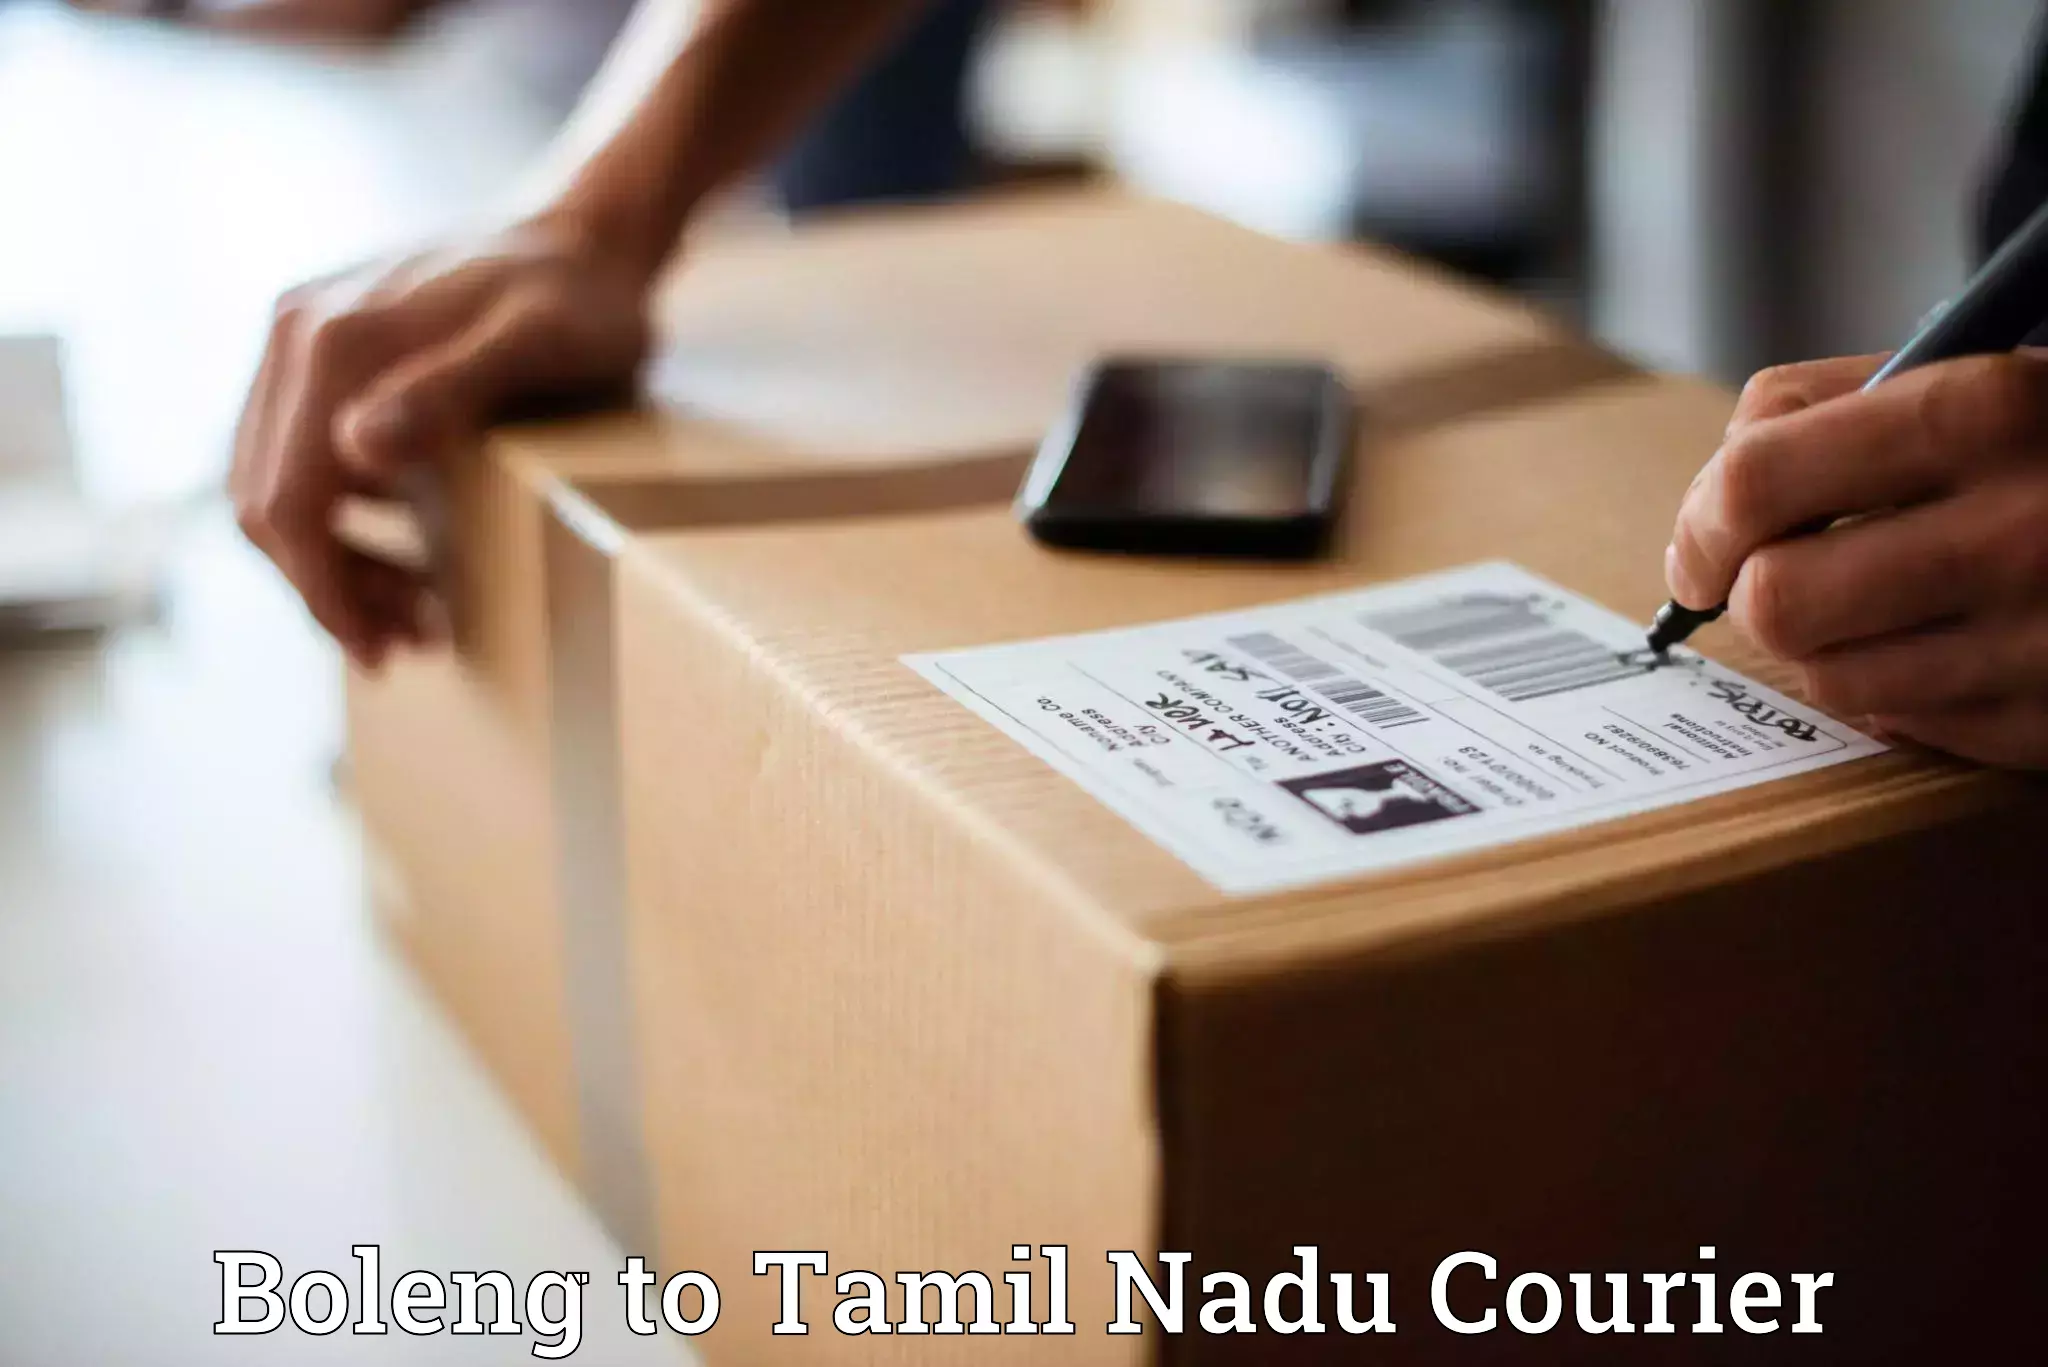 Courier service efficiency in Boleng to Tamil Nadu